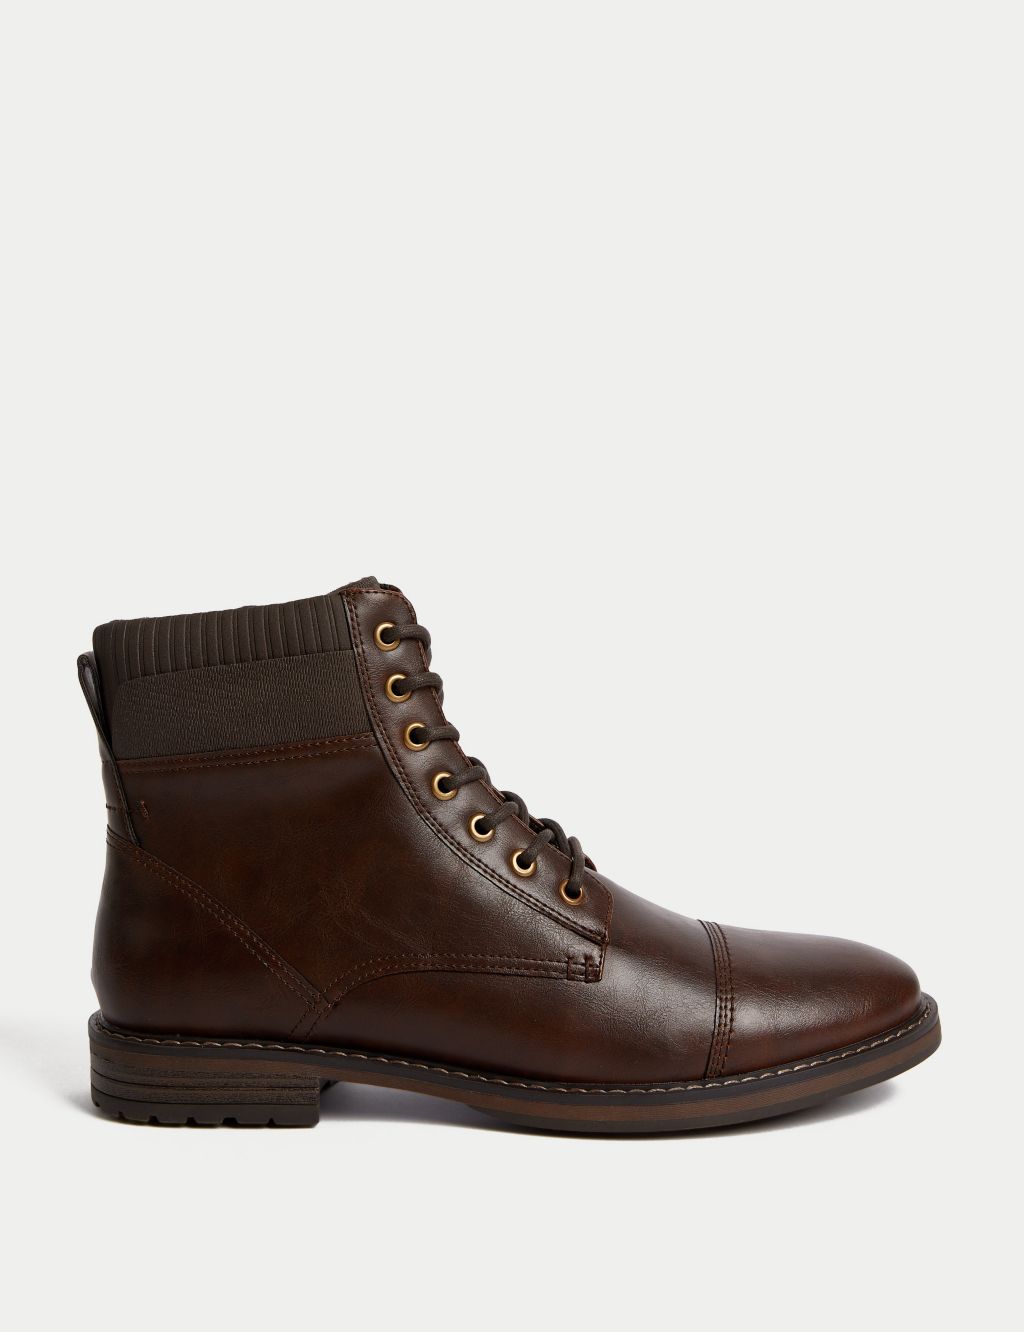 Military Side Zip Casual Boots image 1